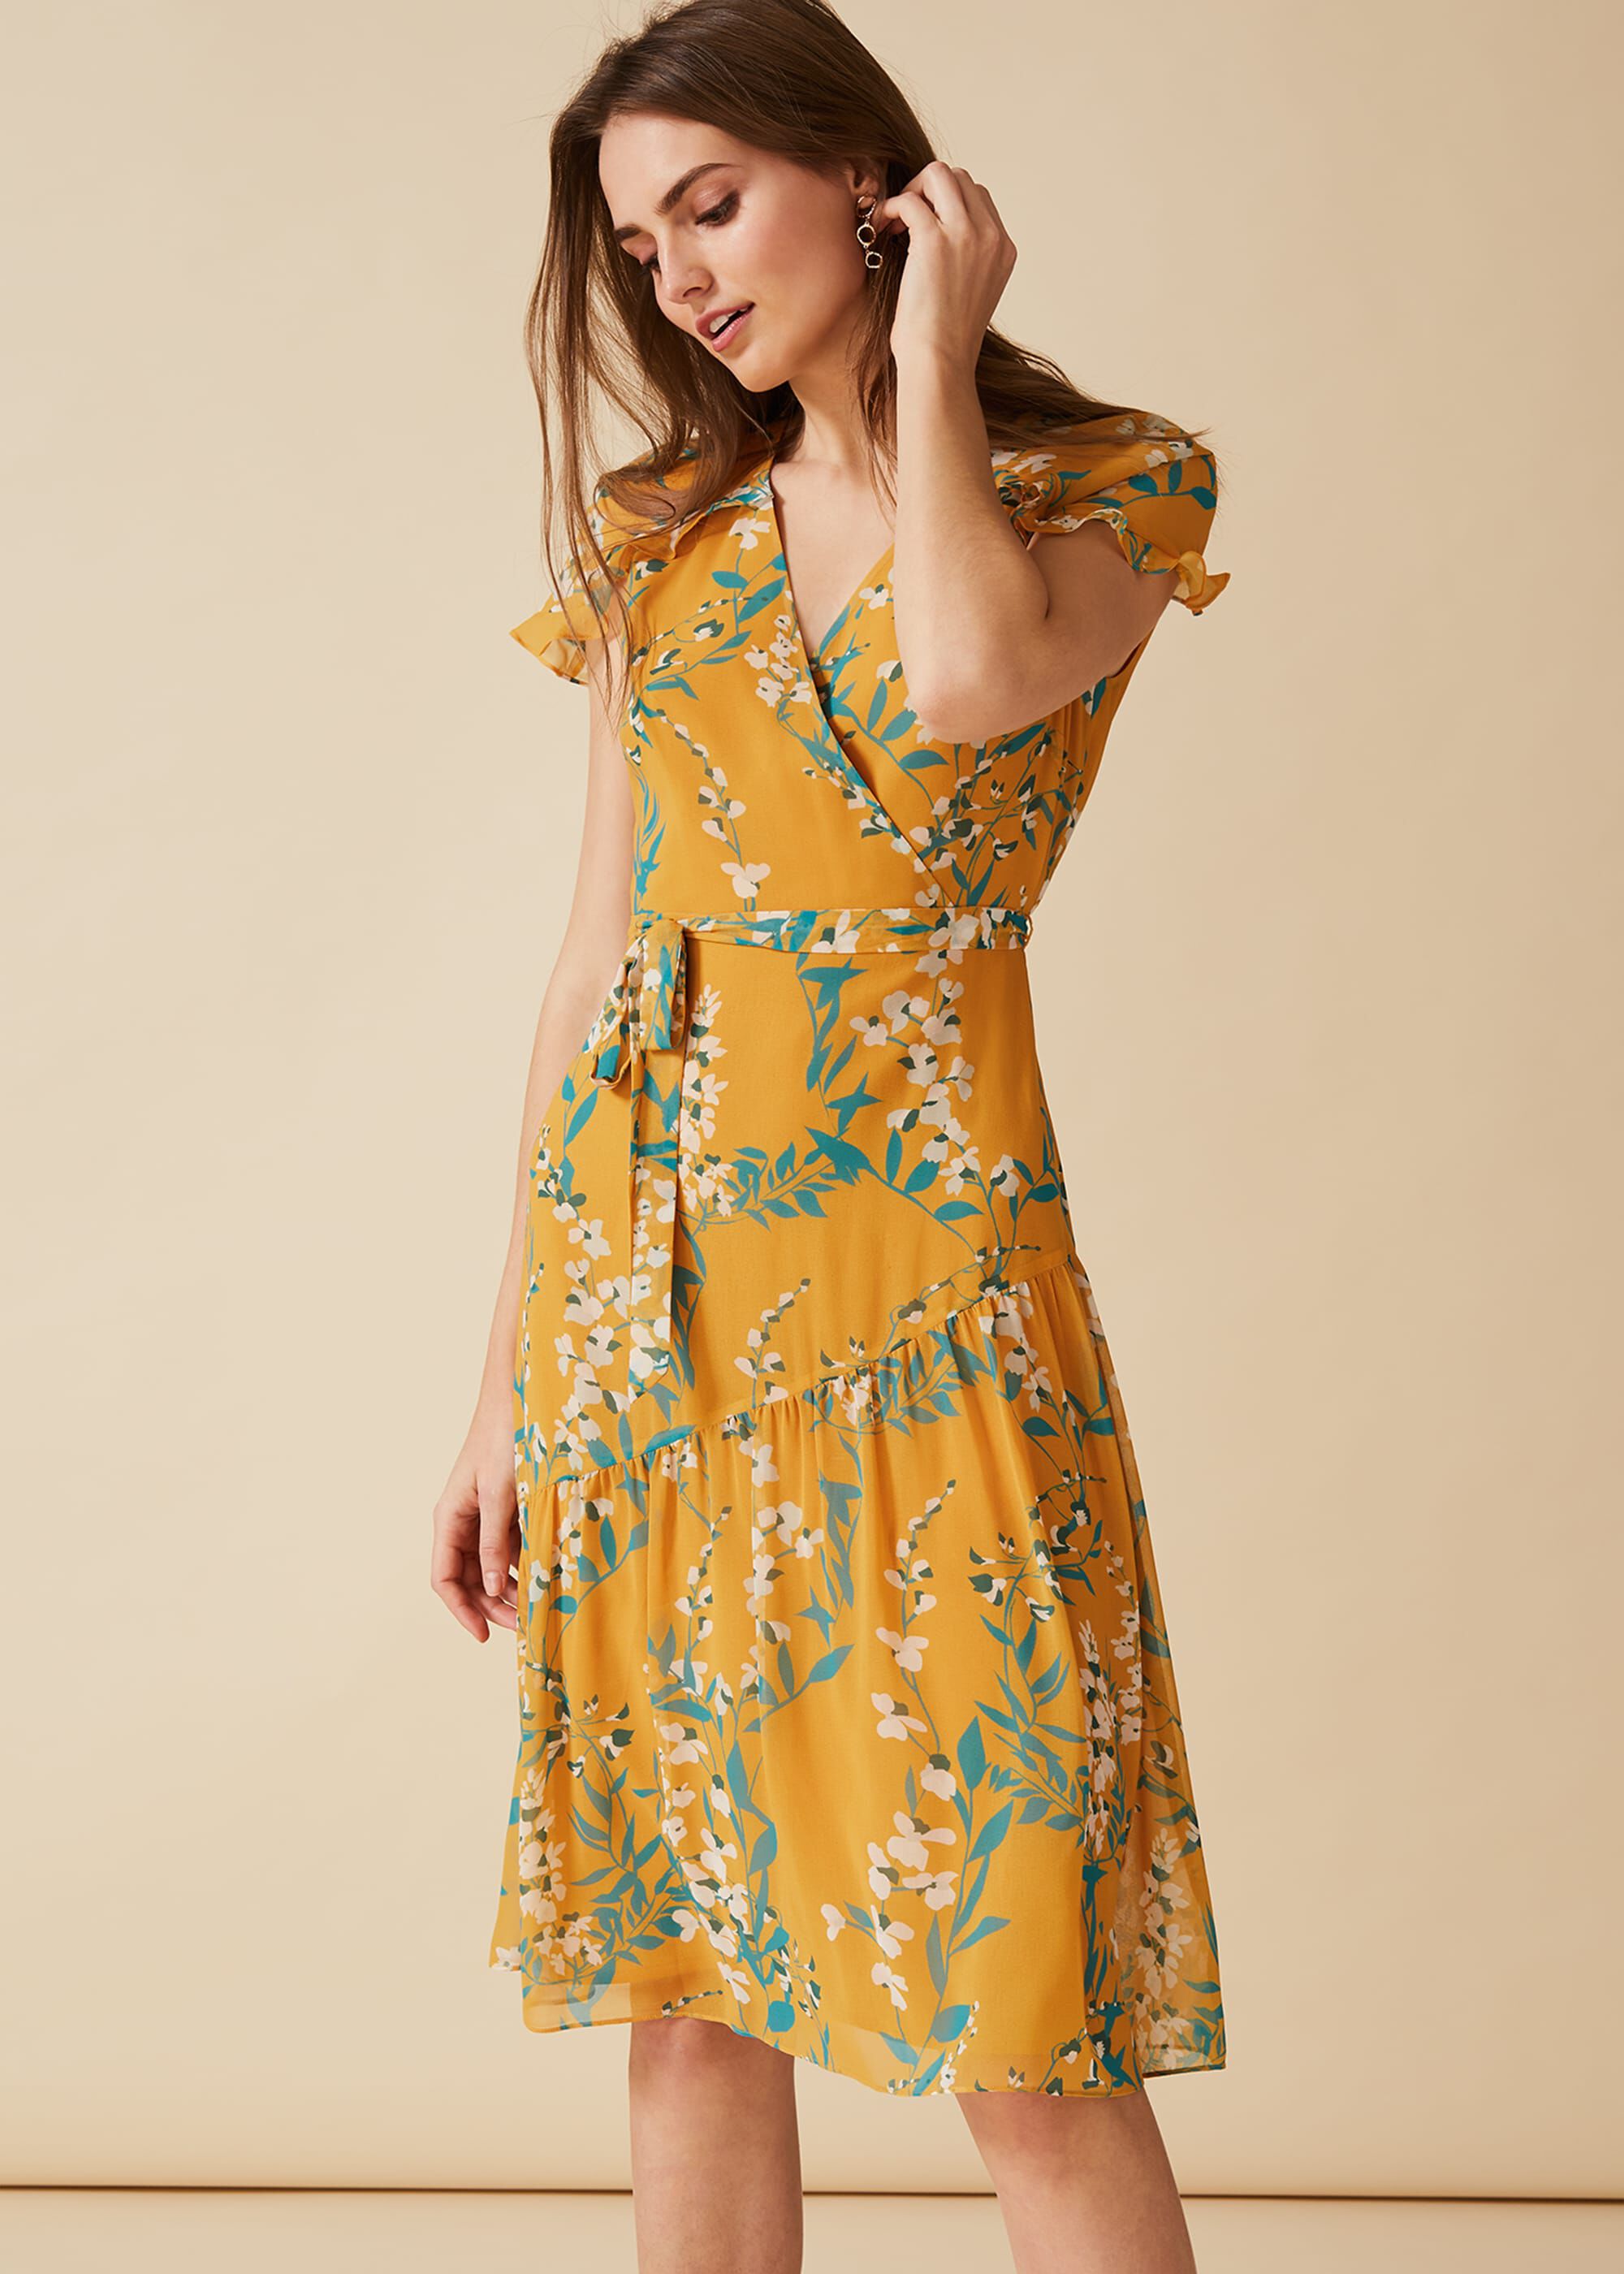 Phase Eight Summer Dresses Top Sellers, 60% OFF | www.rupit.com